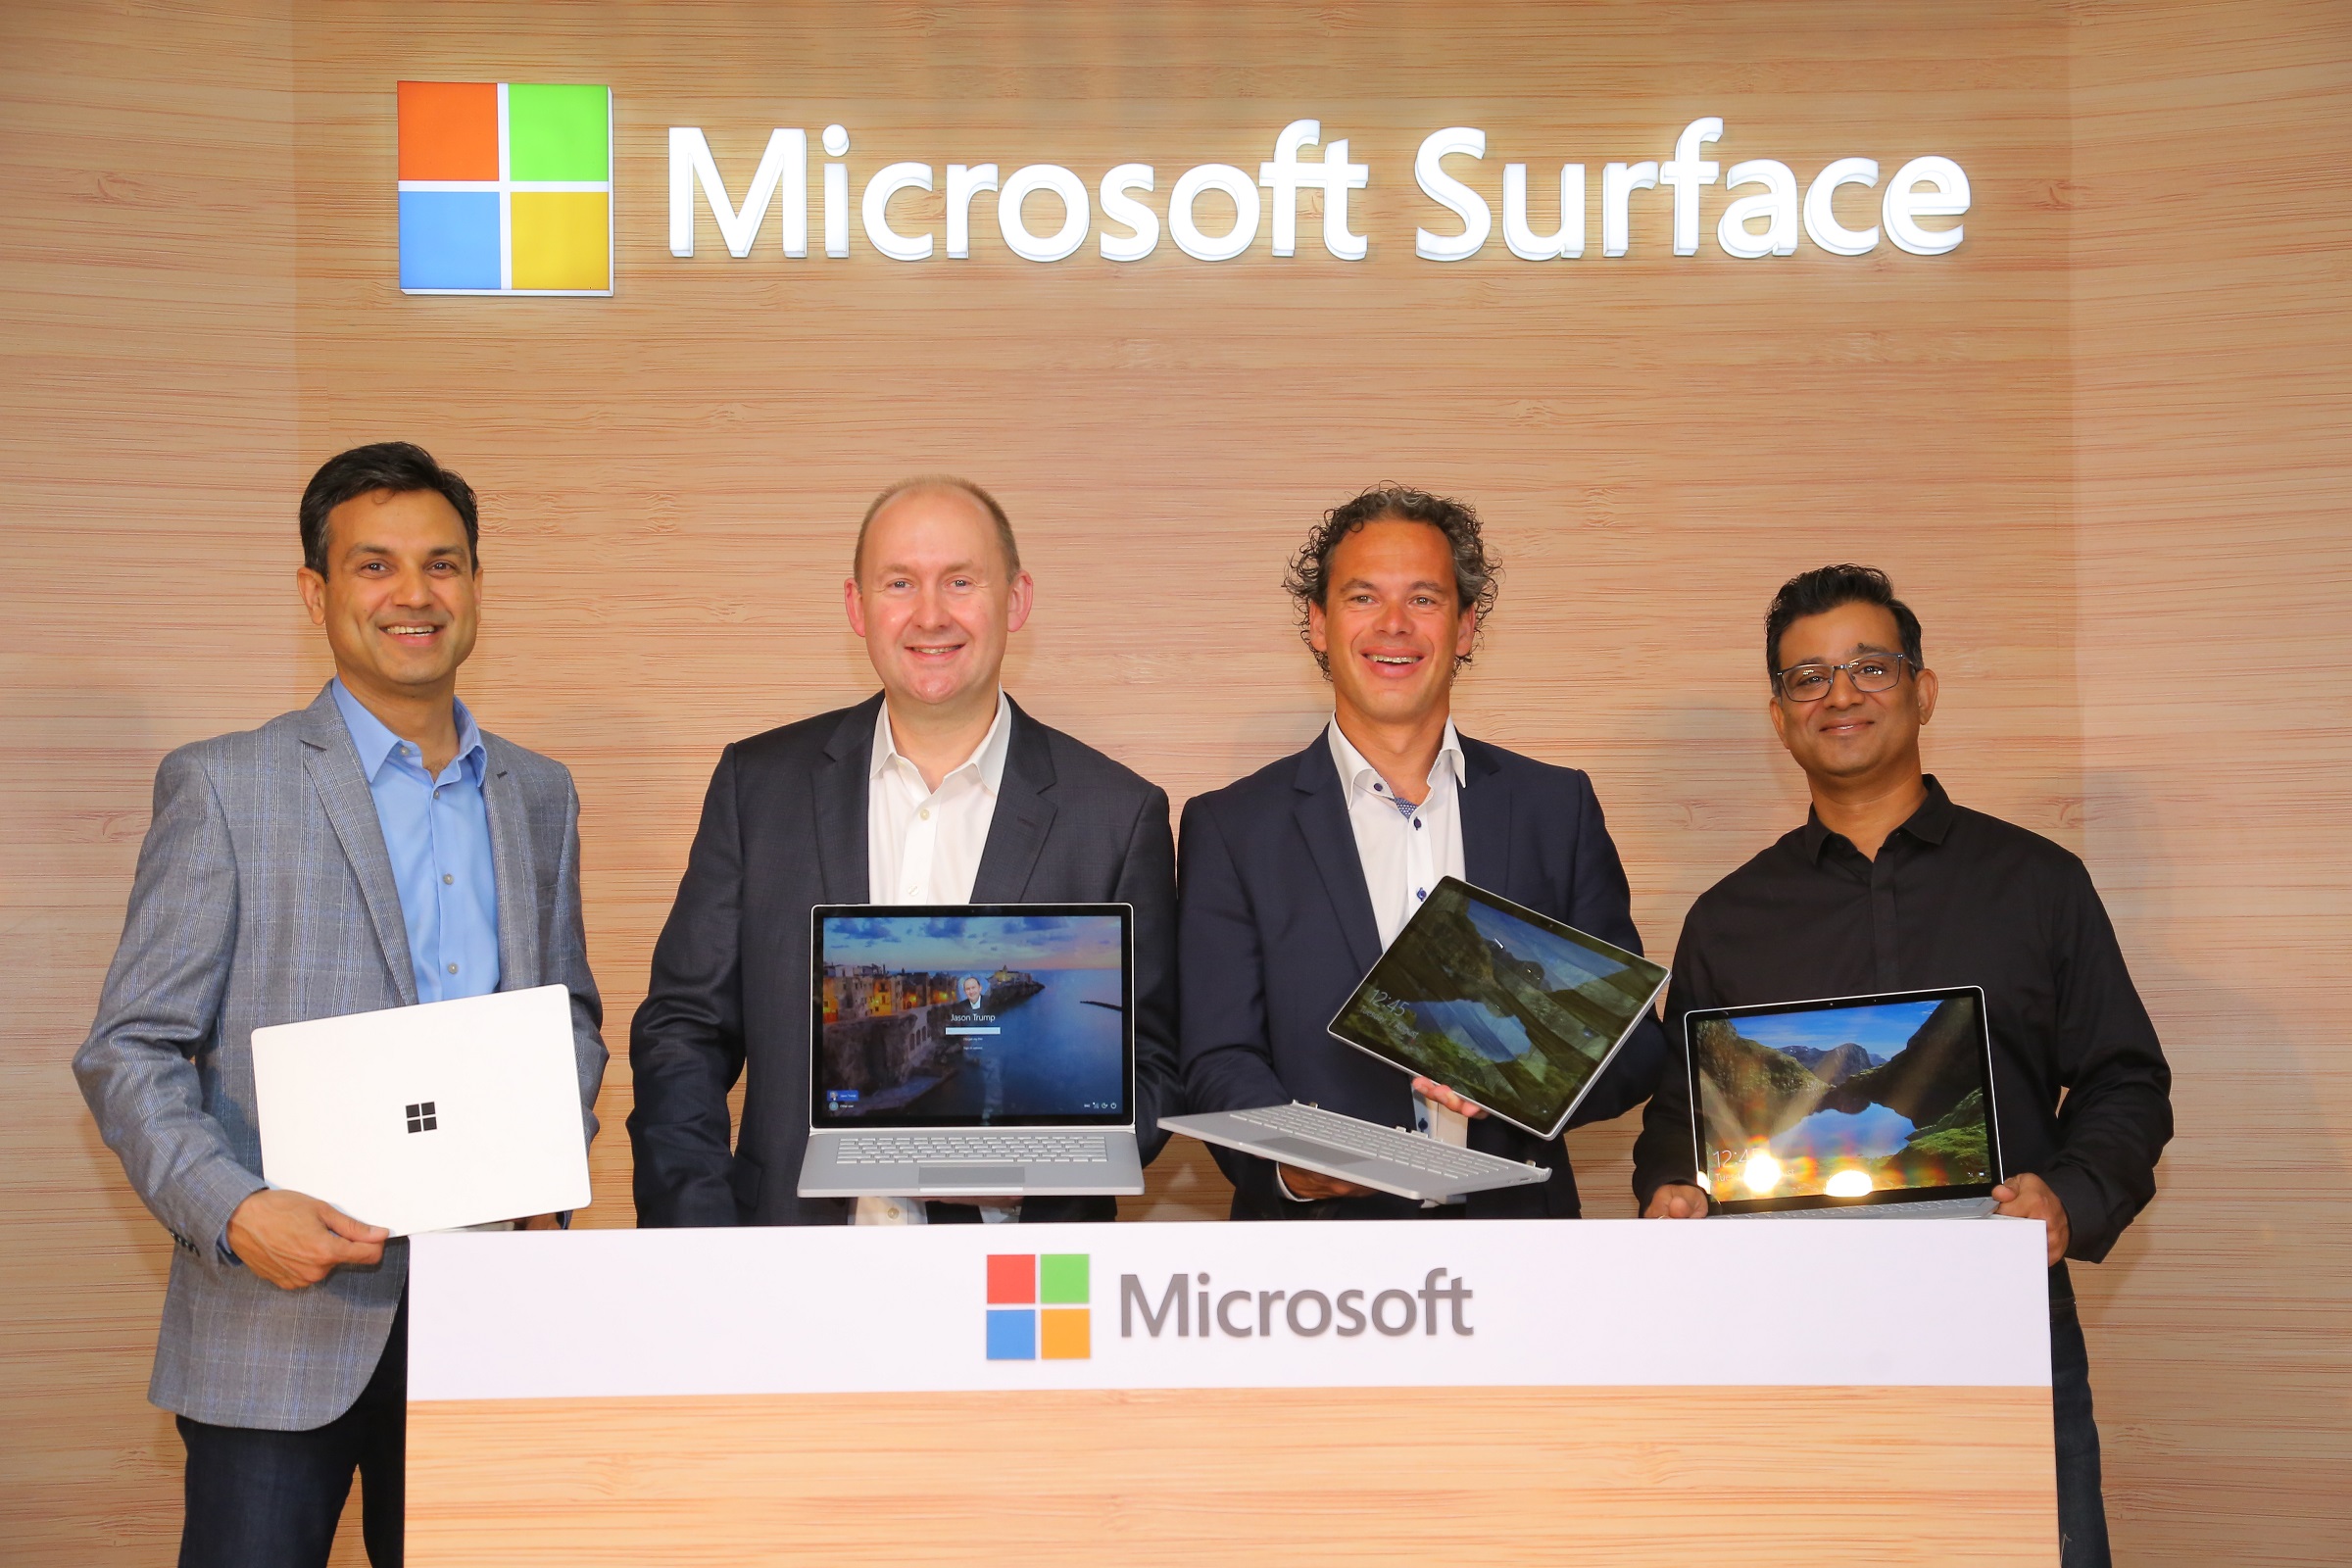 Anant Maheshwari, President, Microsoft India, Jason Trump, Global Black Belt, Surface, Microsoft, Bas Paumen, Director Commercial Channel Programs and Strategy and Priyadarshi Mohapatra, Leader, Consumer & Enterprise Business at the launch of Microsoft Surface Book 2 and Surface Laptop in India.